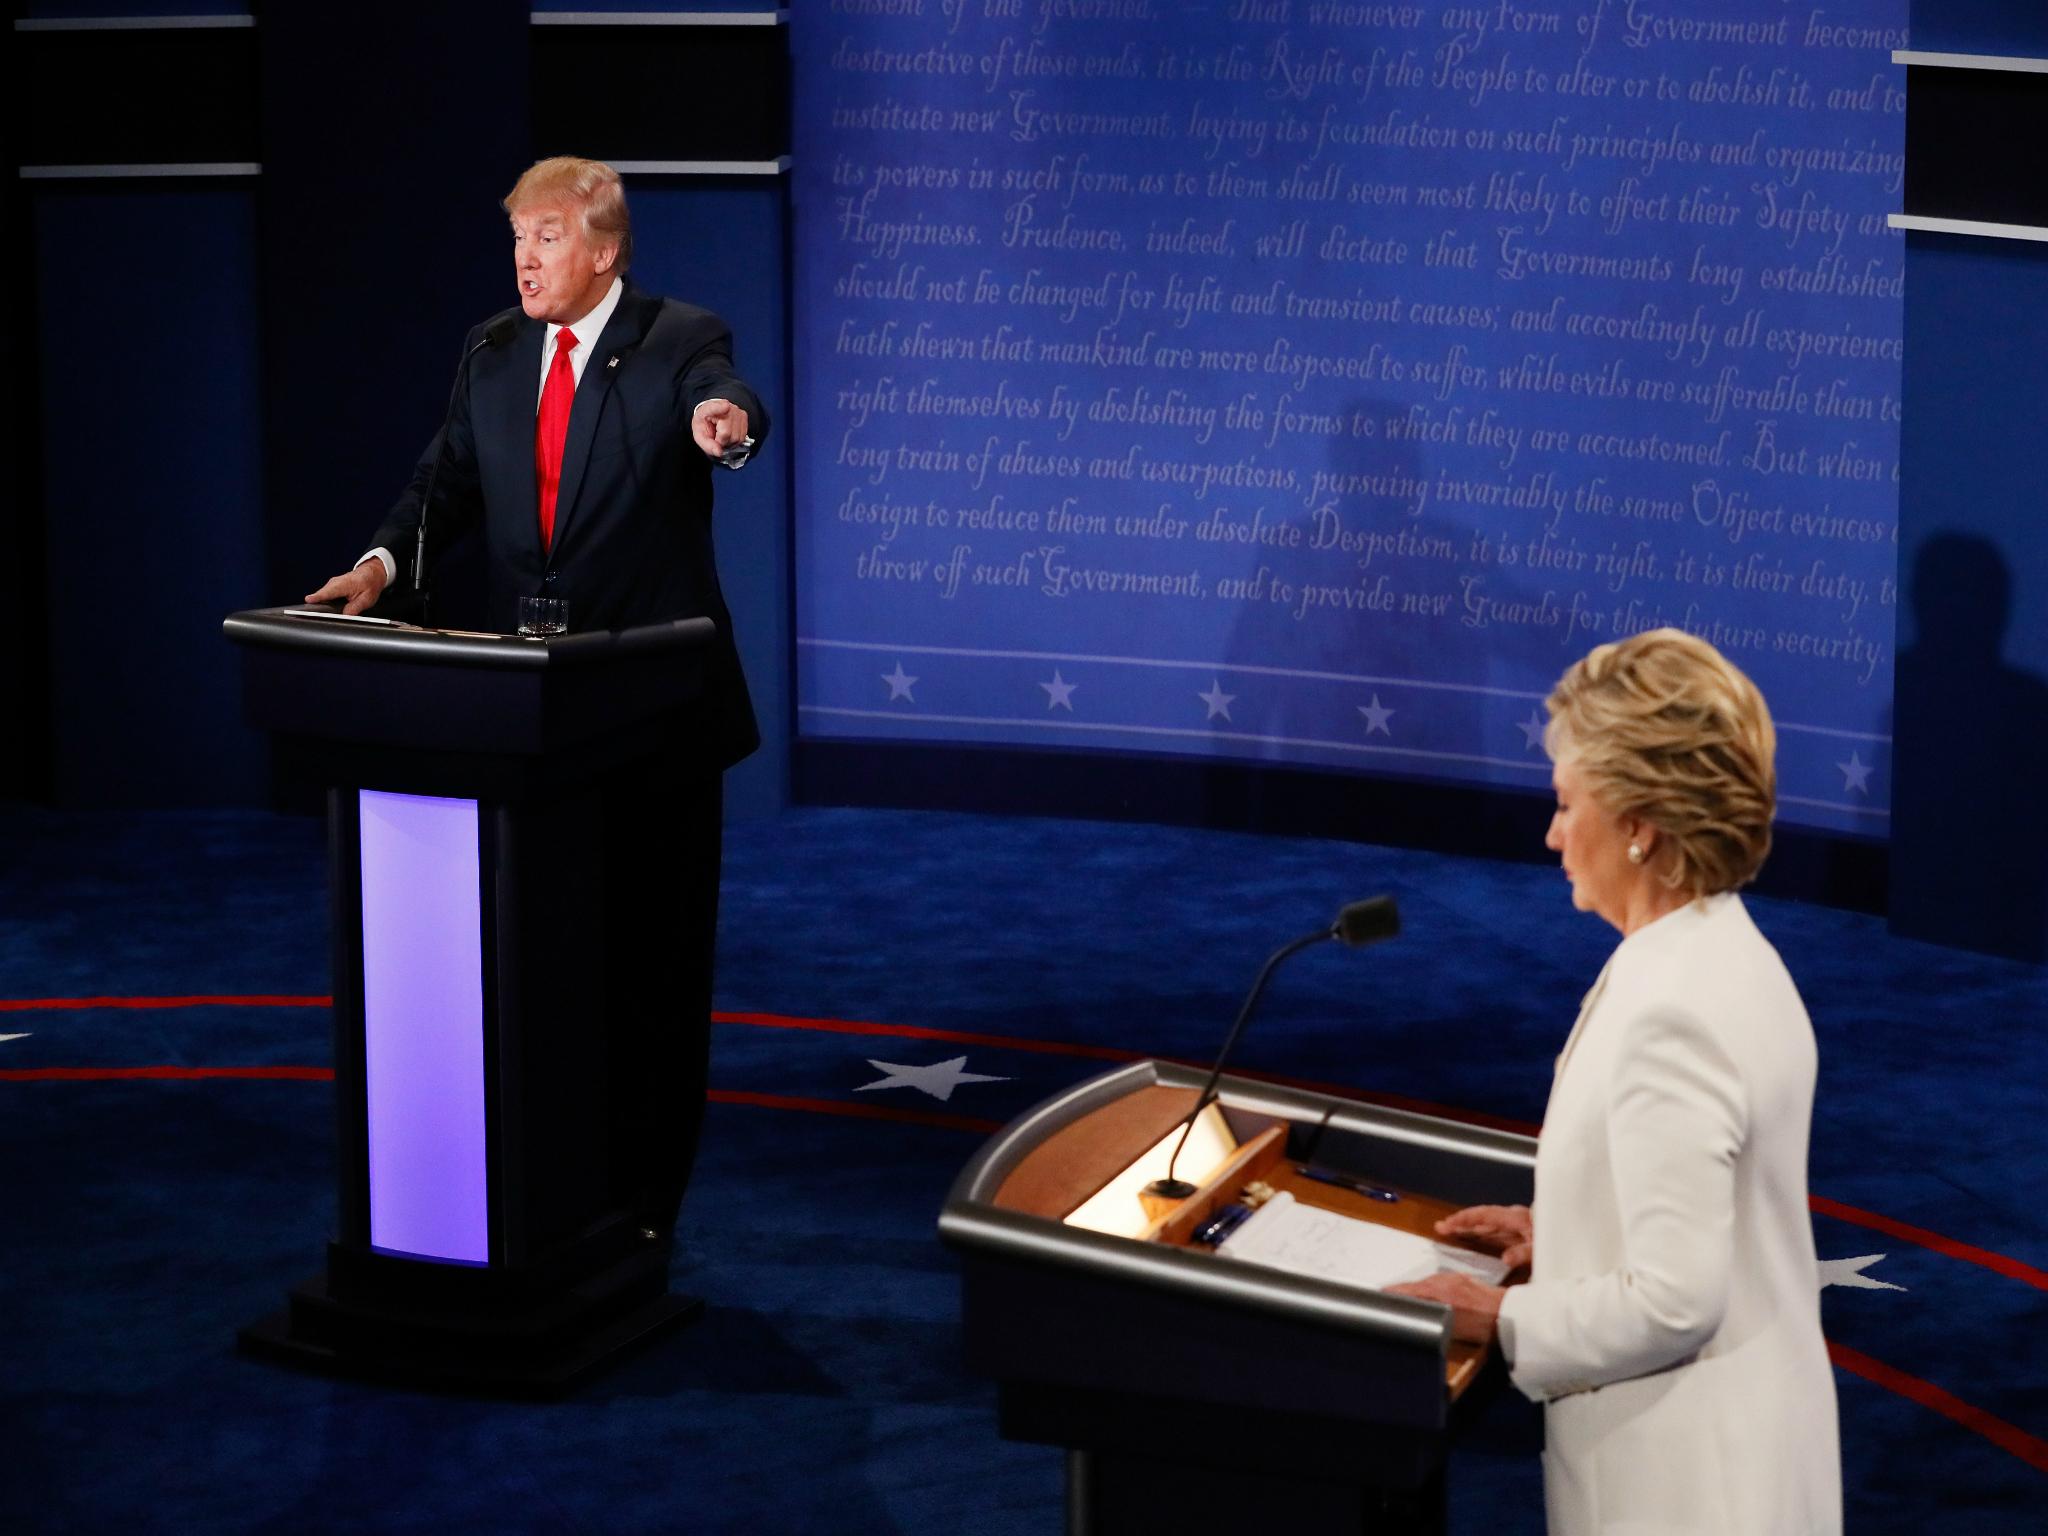 Donald Trump and Hillary Clinton during one of the 2016 campaign debates. He has been accused of leaking classified information to Russian officials during a meeting in the White House